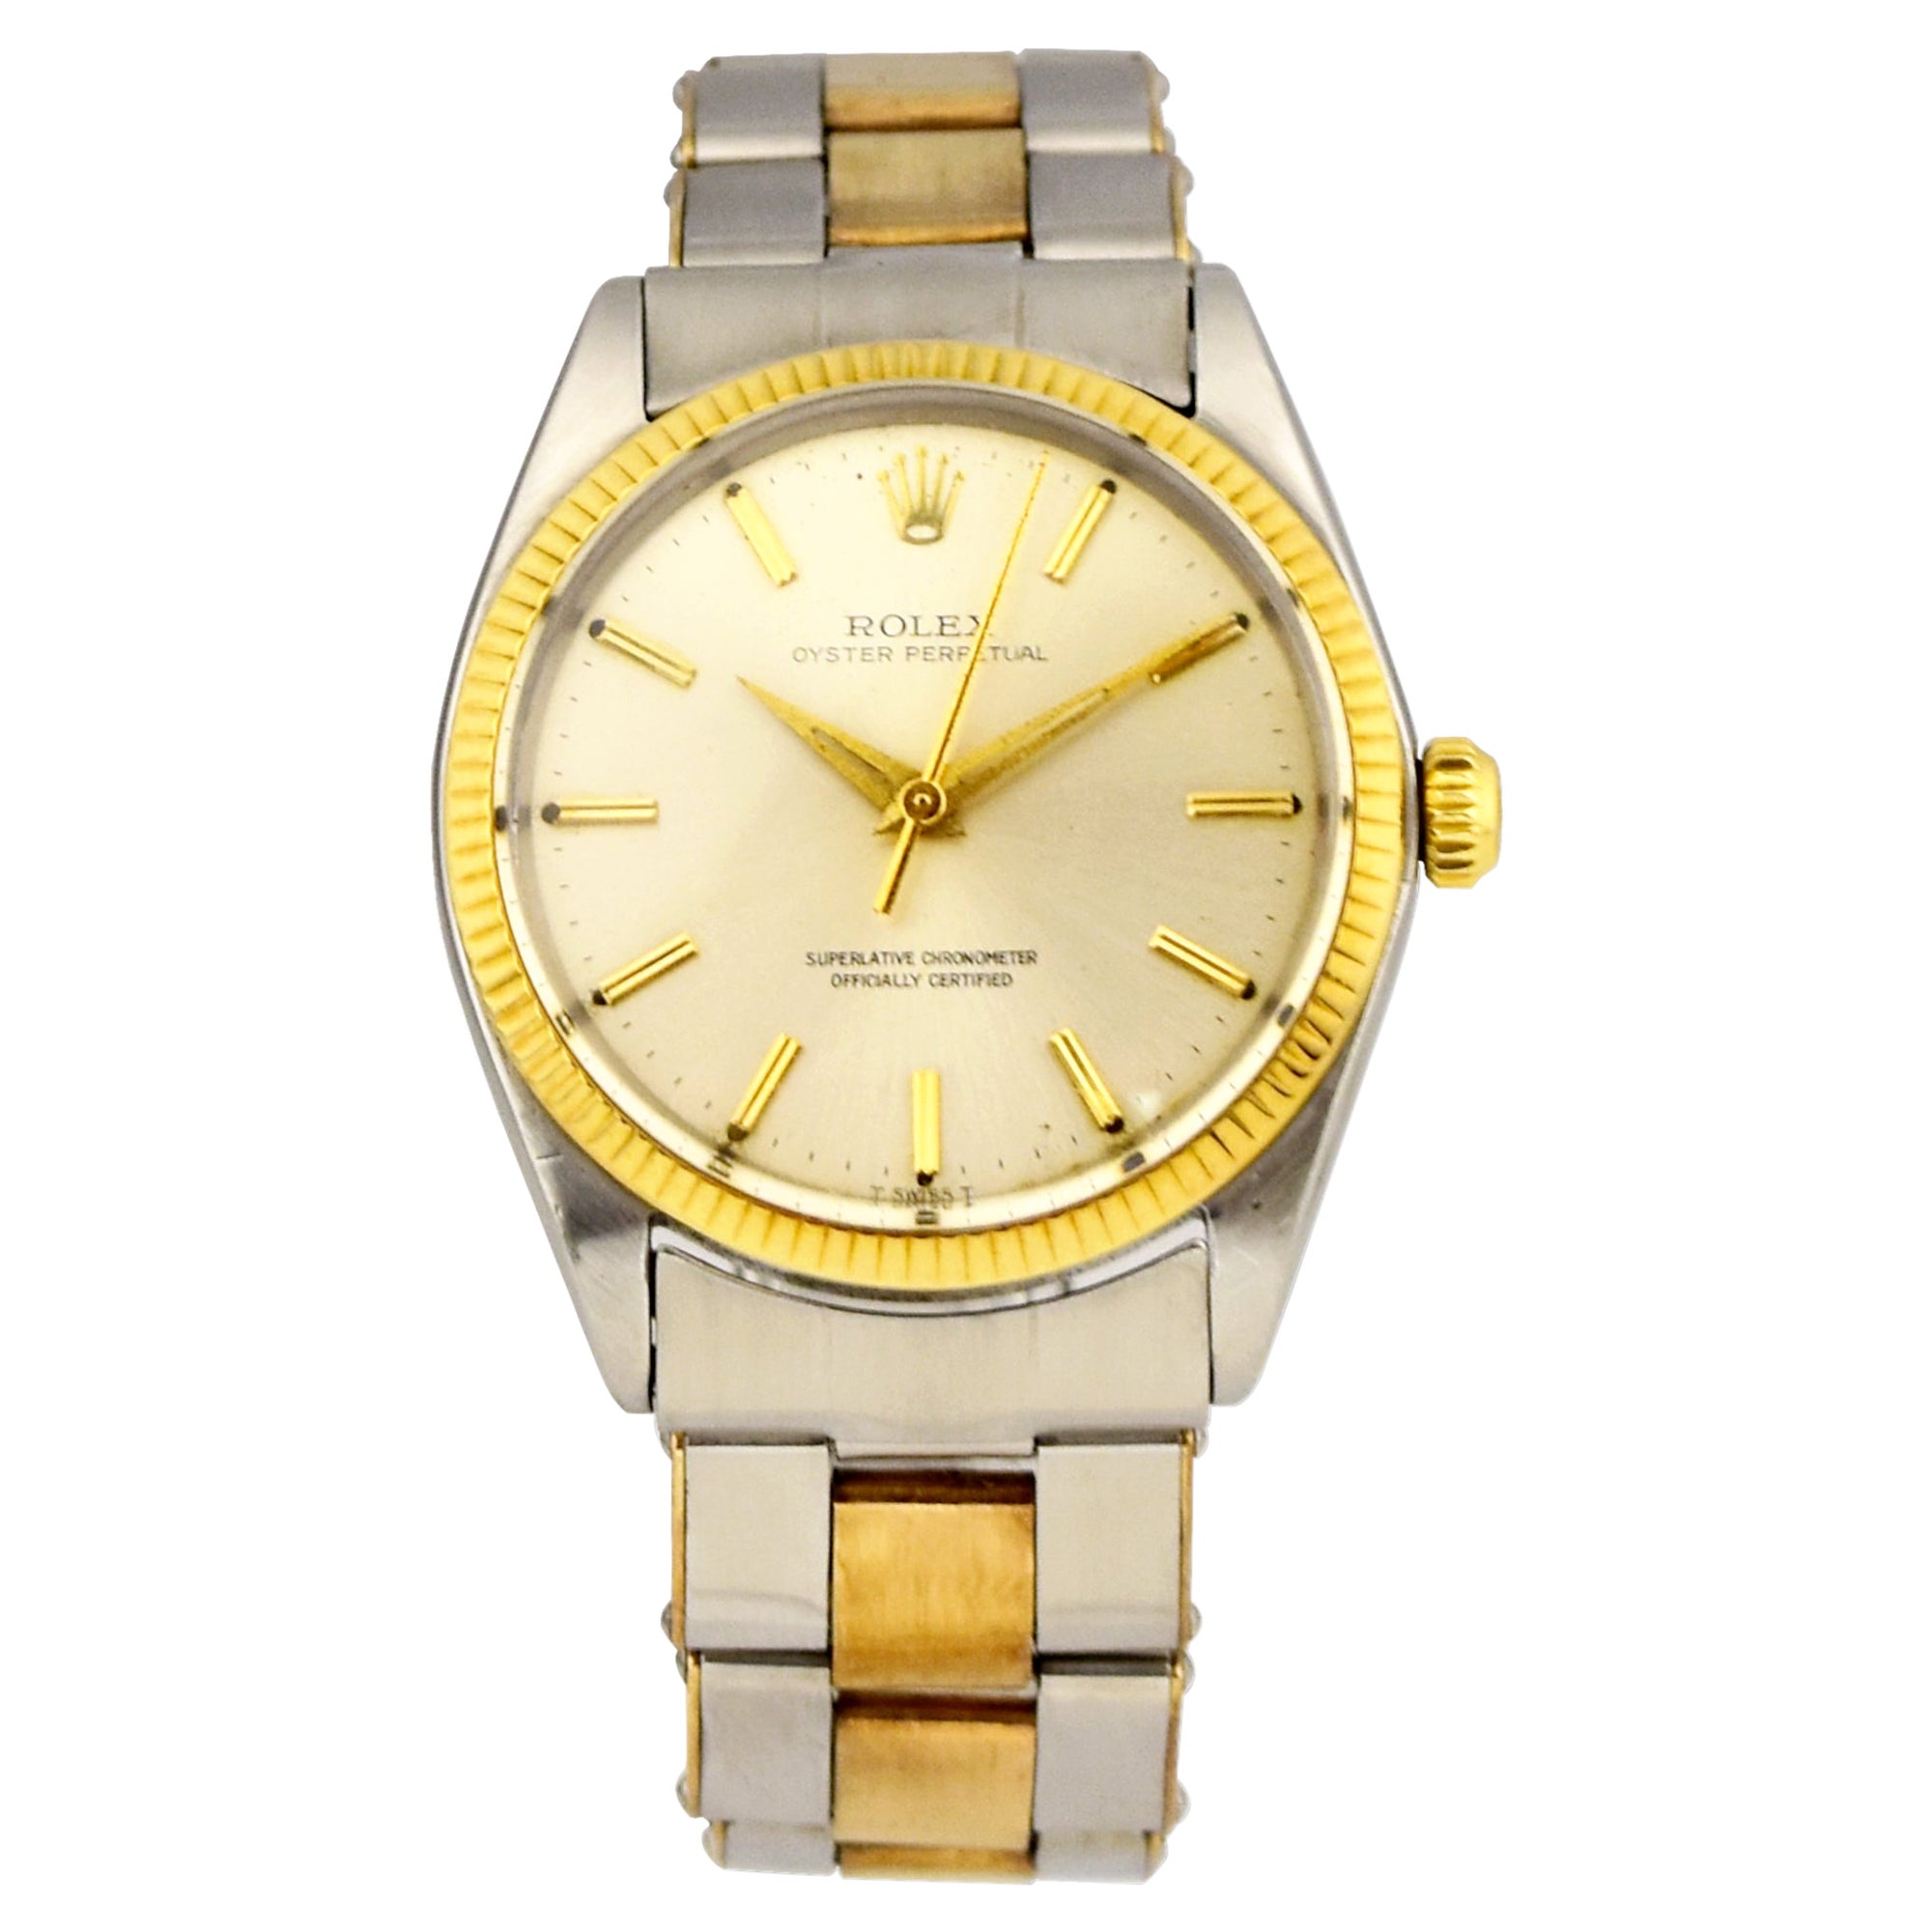 Rolex Oyster Perpetual Ref.1005 Two-Tone Watch